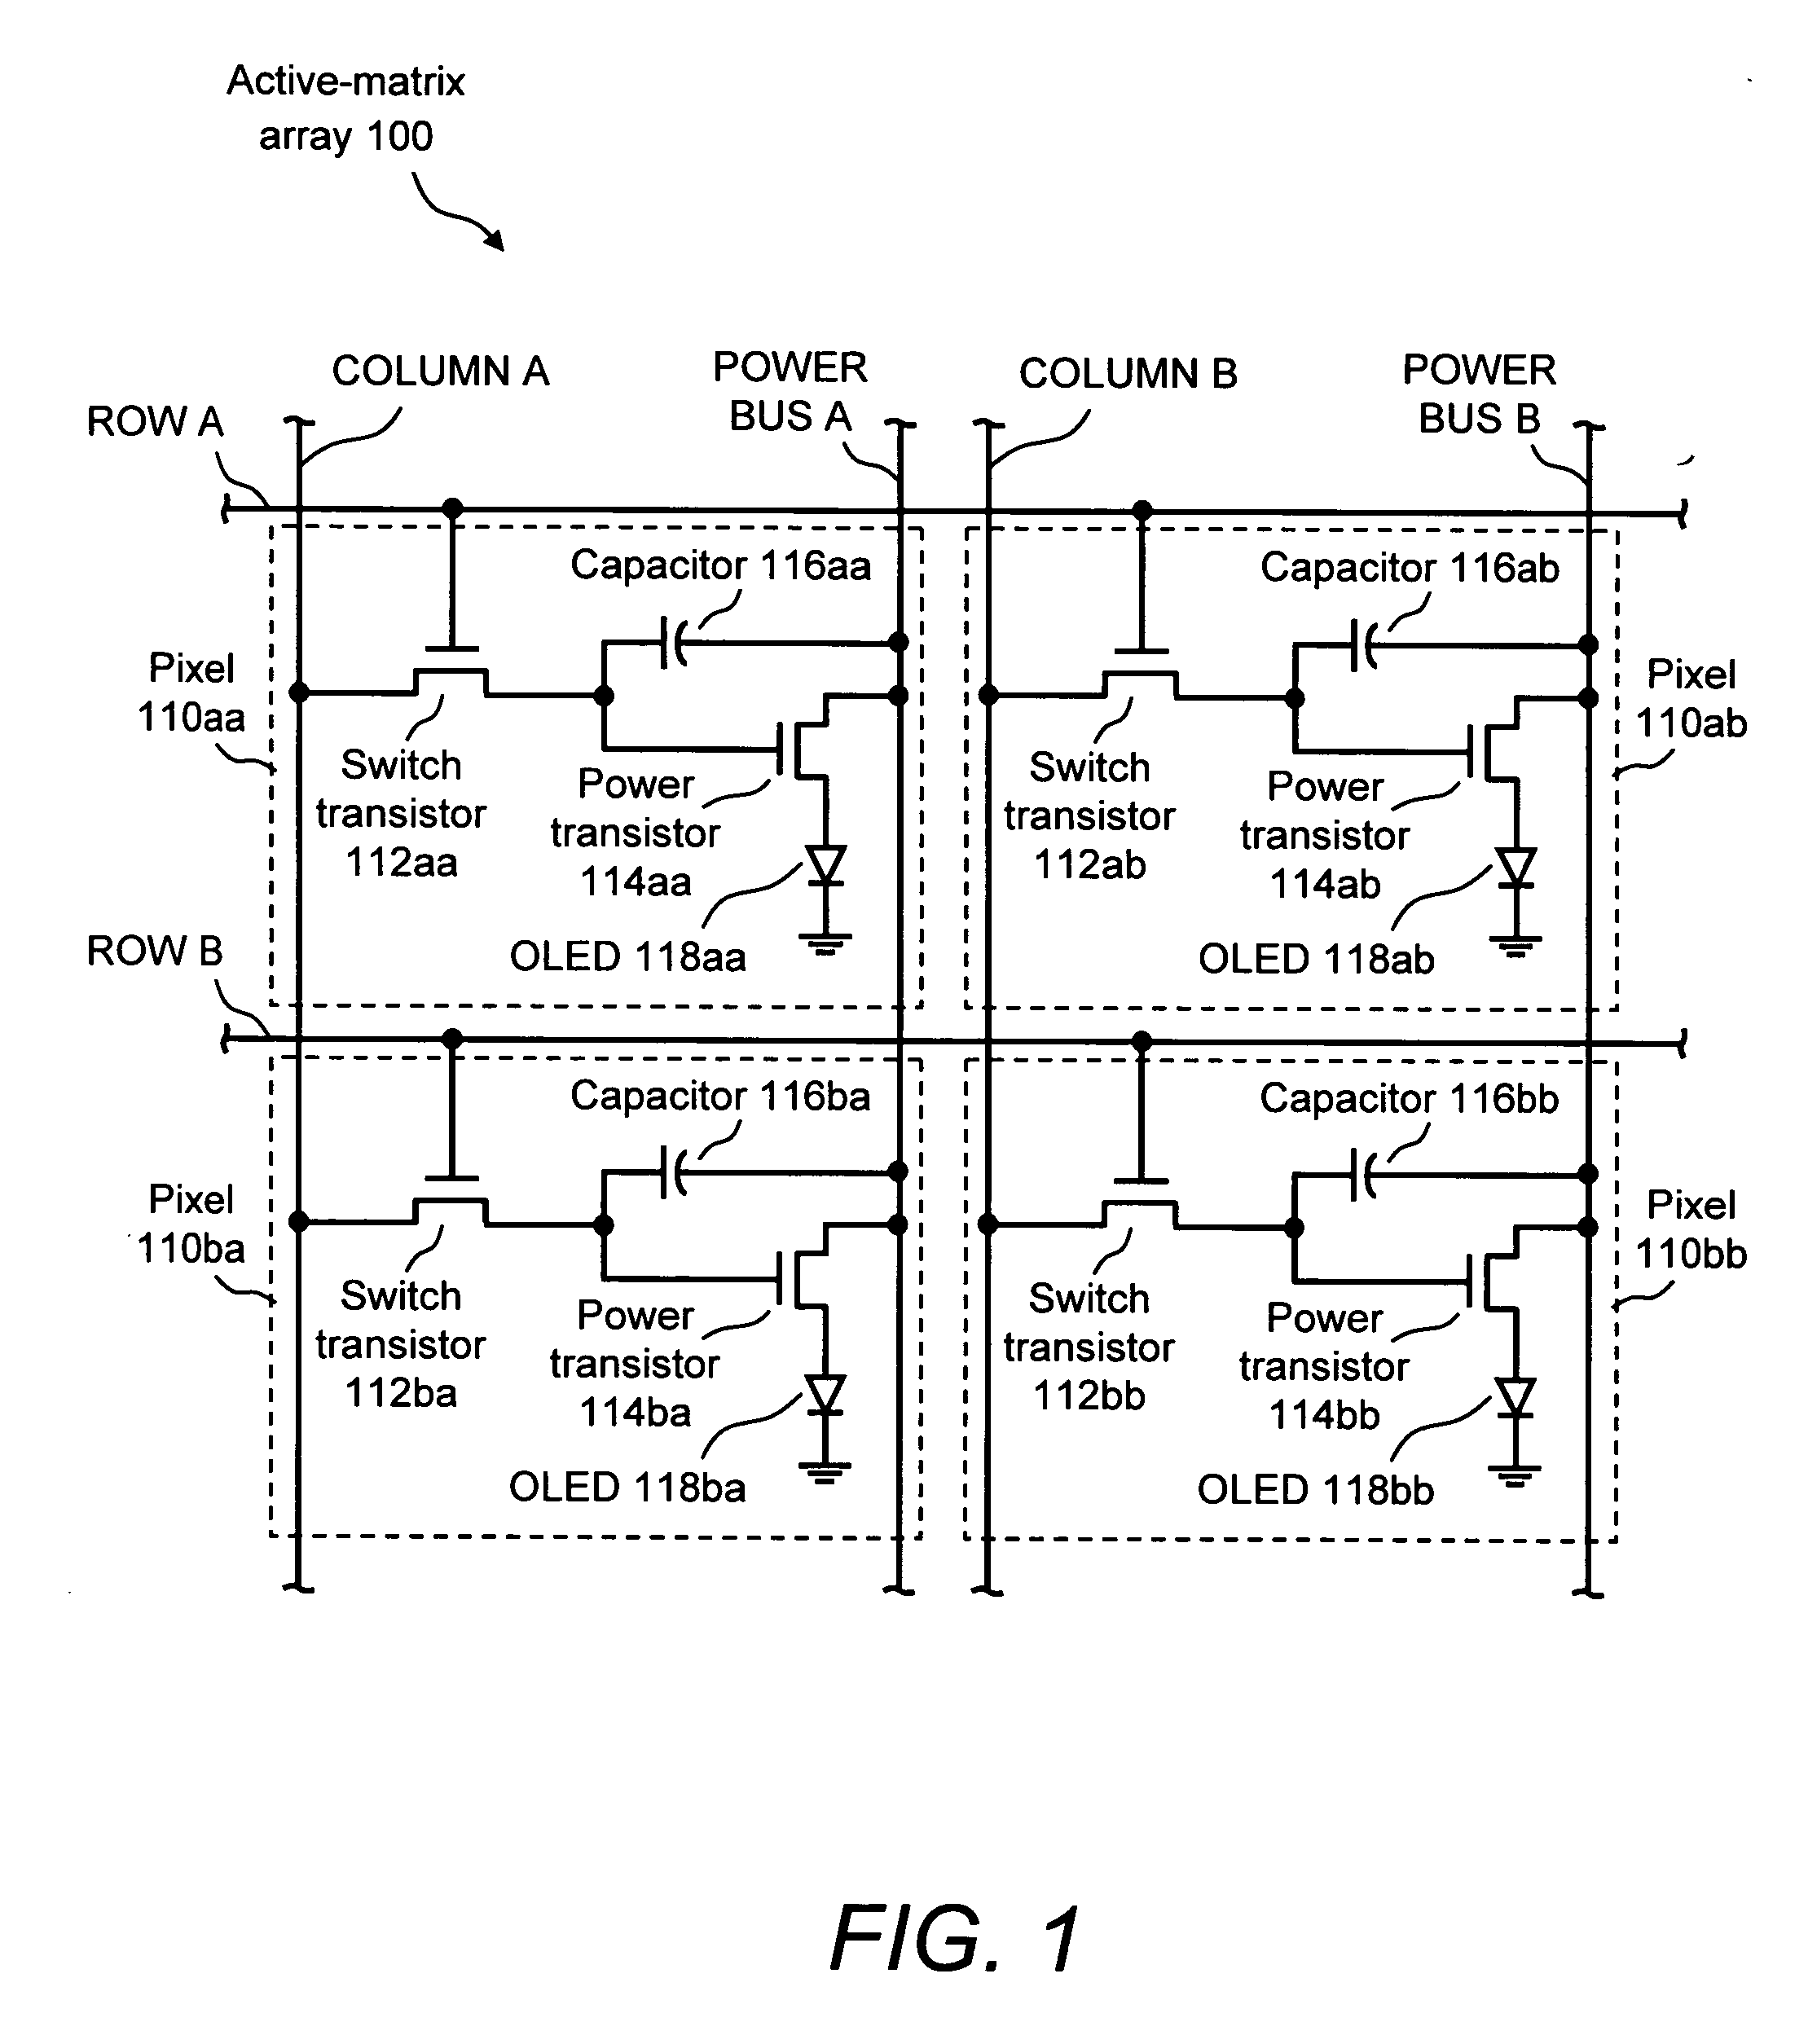 System and method for compensation of active element variations in an active-matrix organic light-emitting diode (OLED) flat-panel display